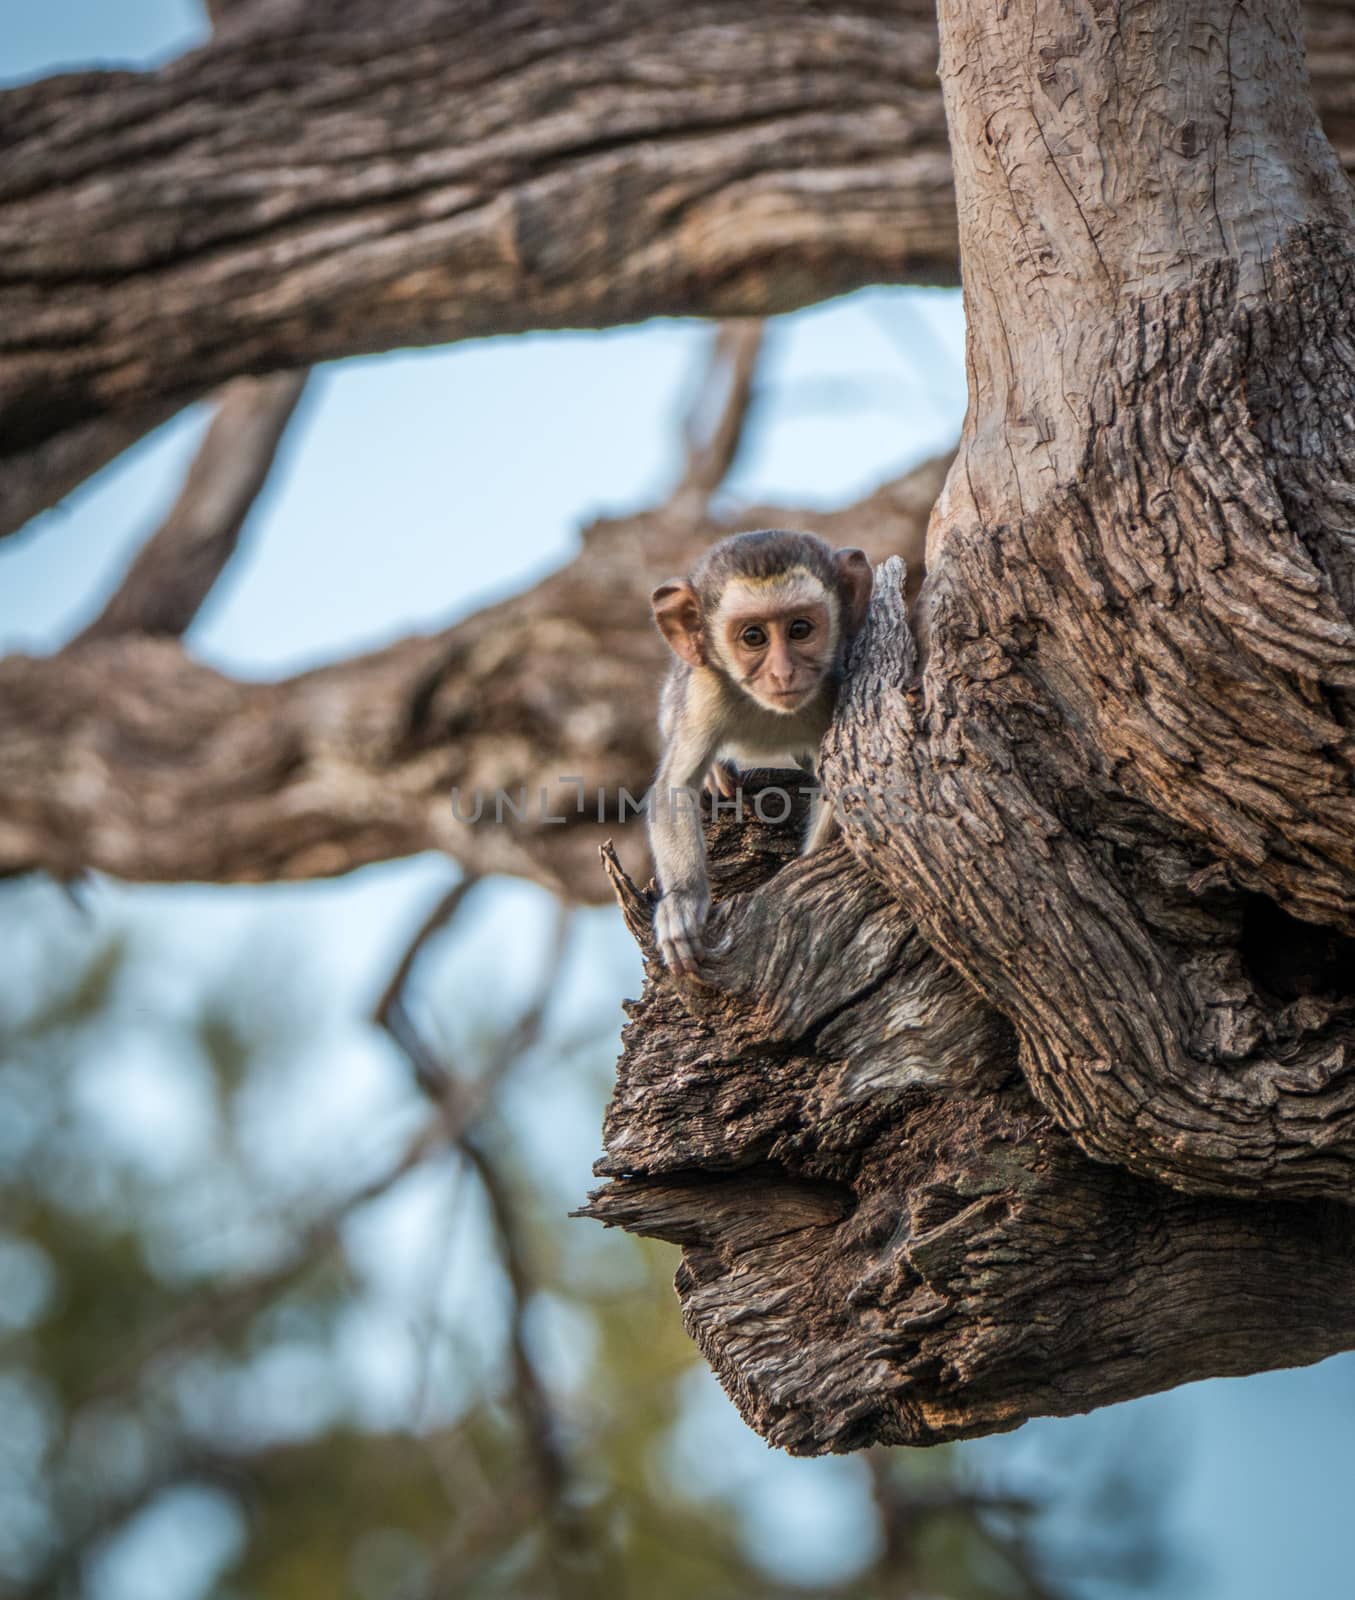 A young Vervet monkey starring at the camera. by Simoneemanphotography